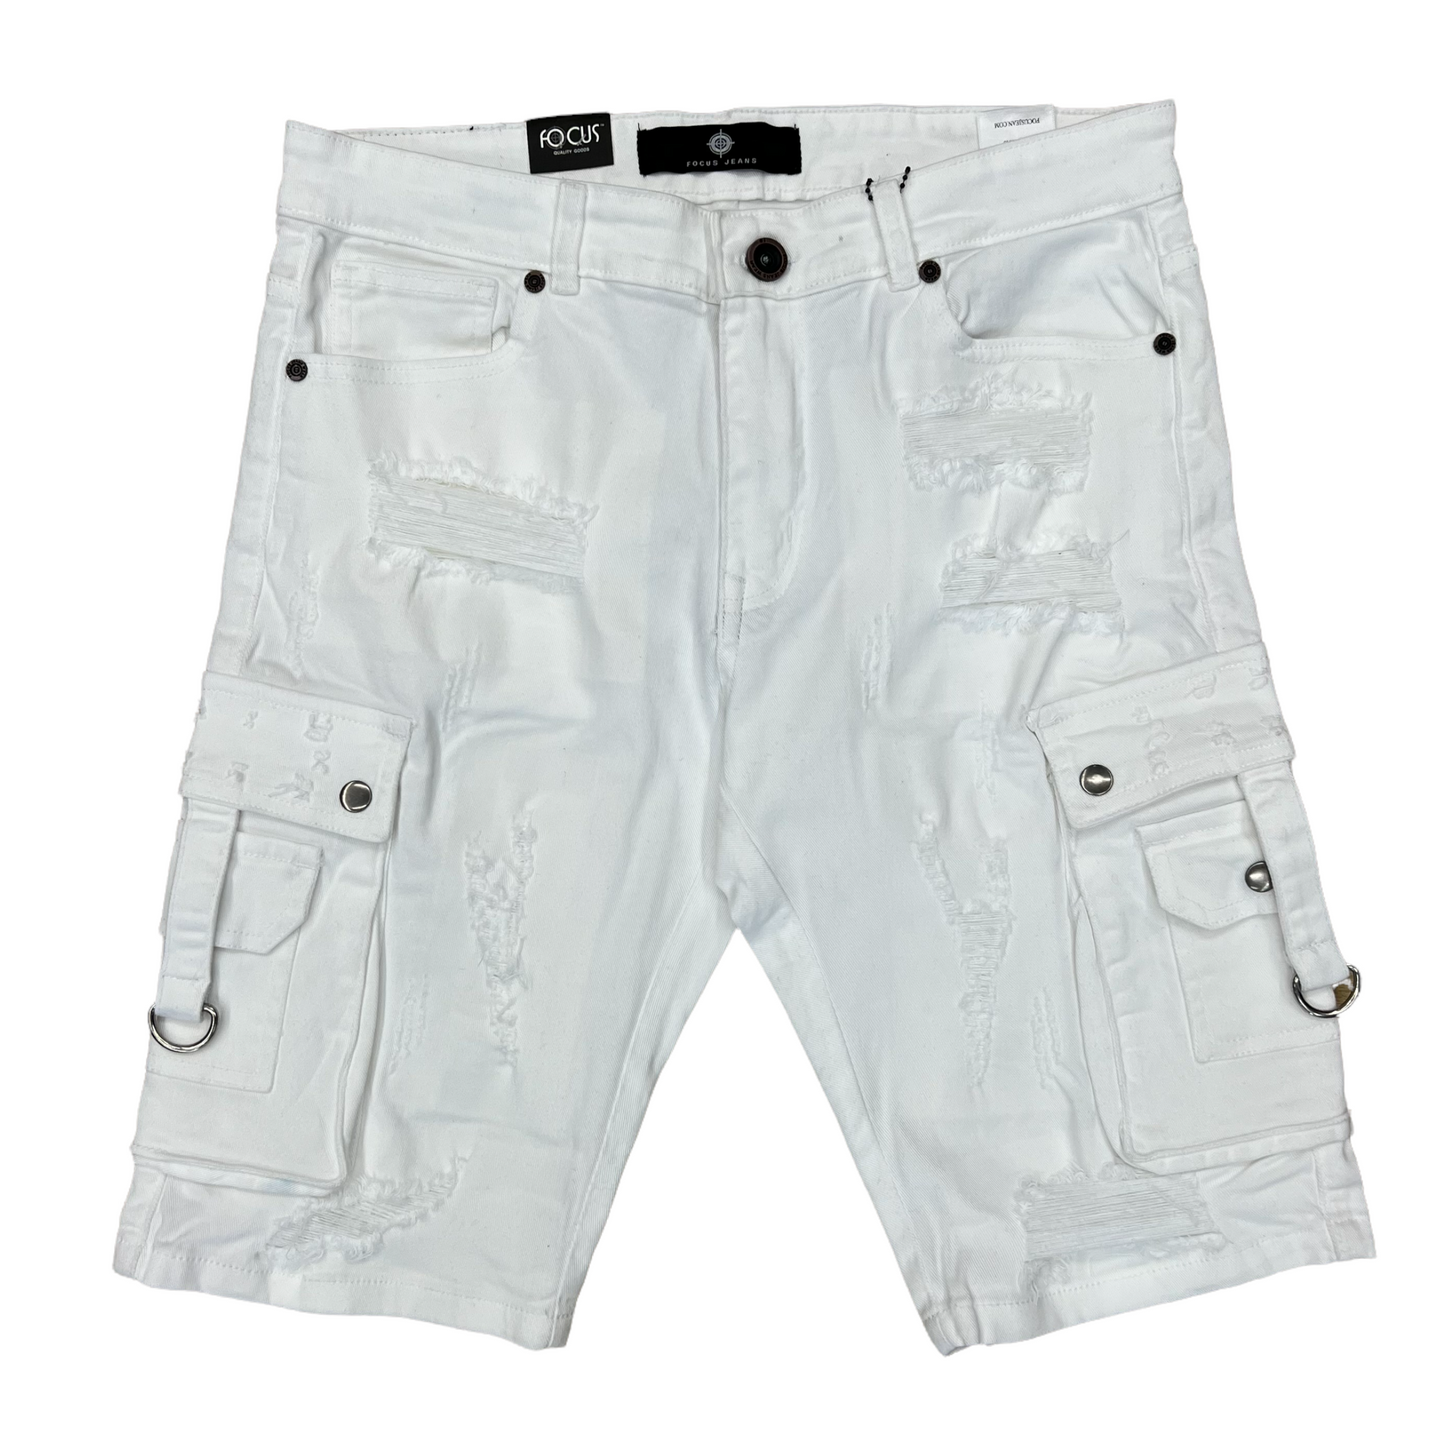 Focus Side Pockets off White Jean Shorts